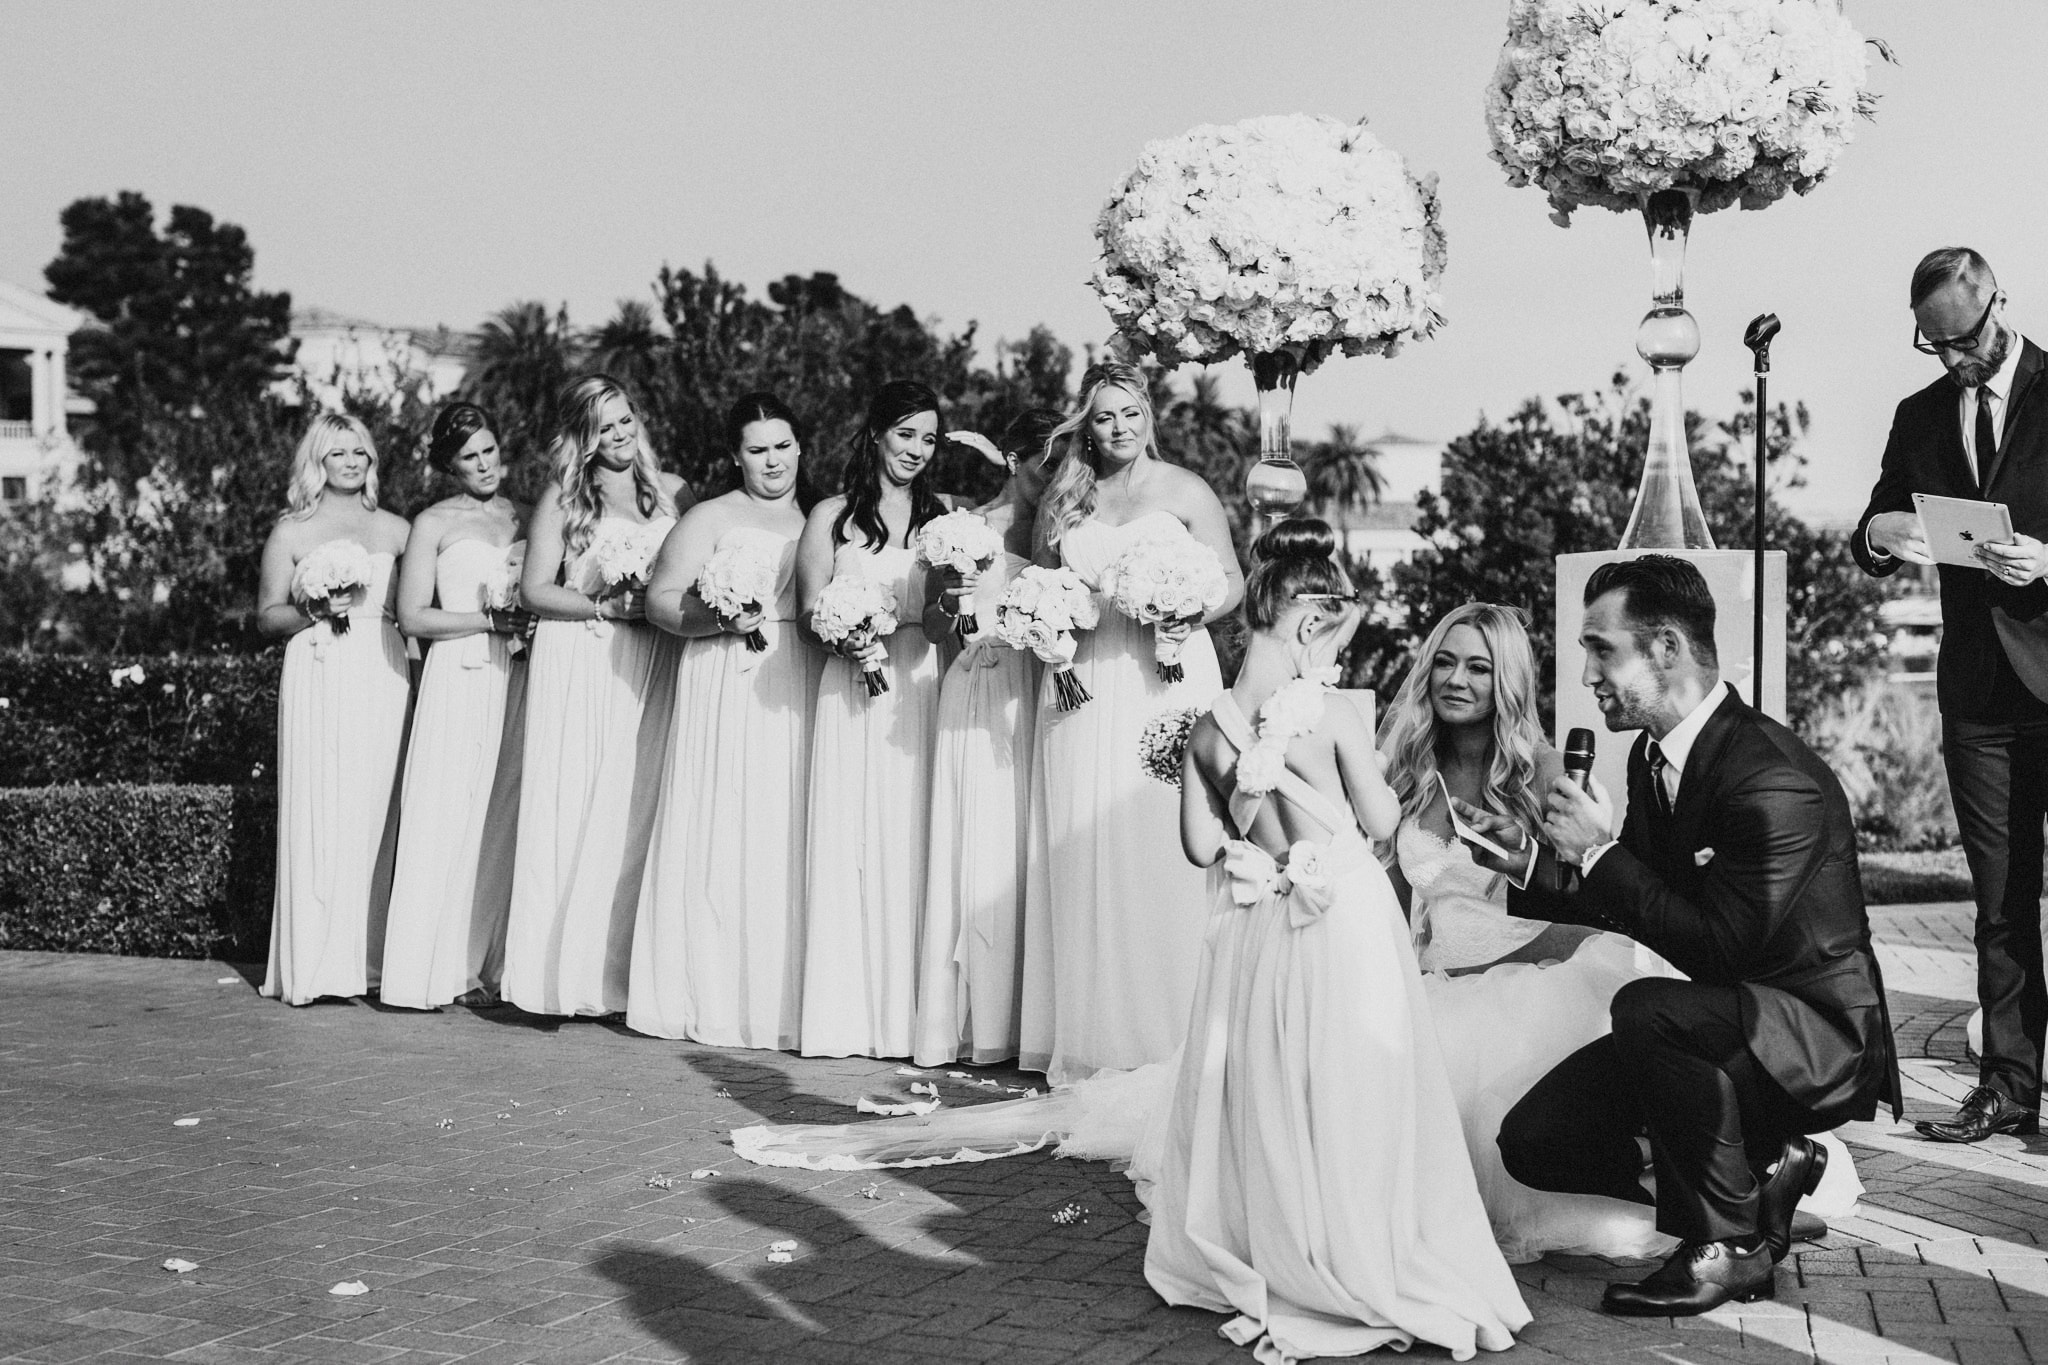 A bride and groom speak to the flower girl during a beautiful wedding ceremony at Pelican Hill Resort on Newport Beach.